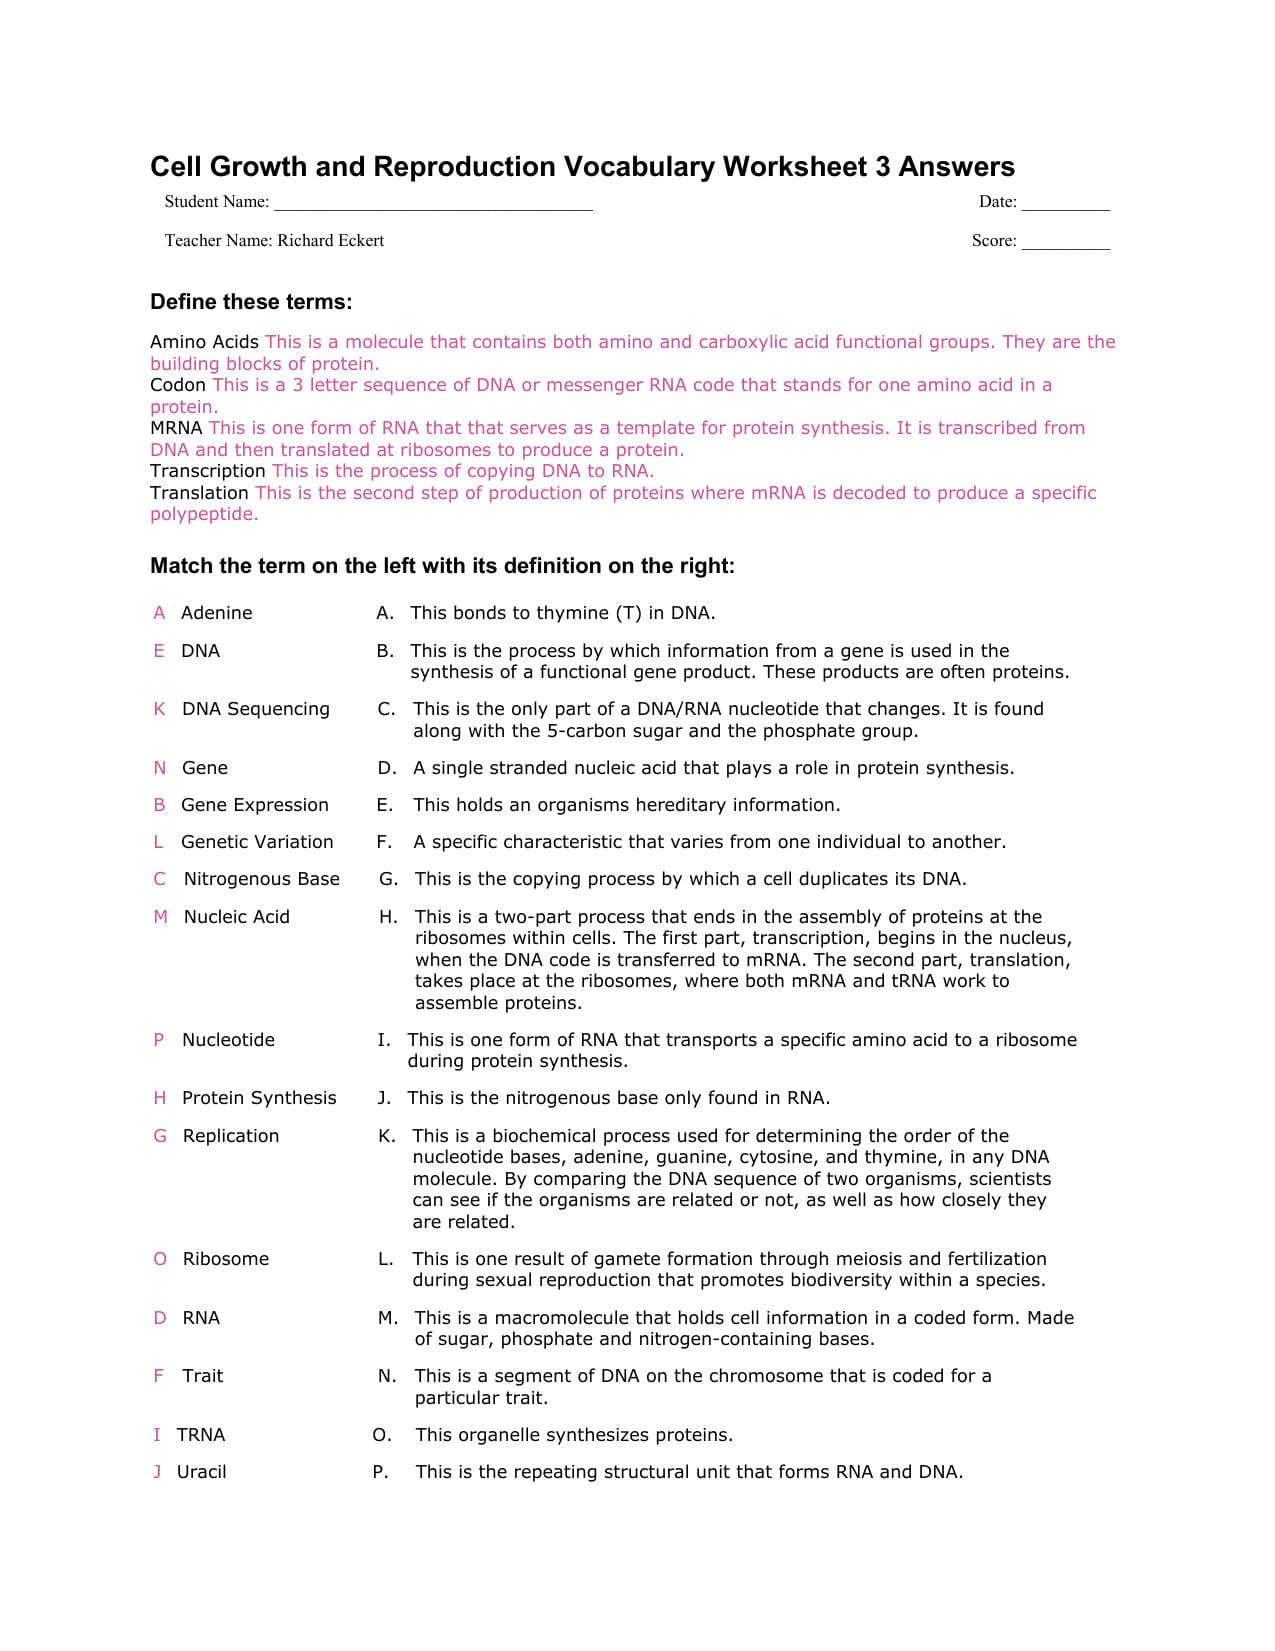 Cell Growth And Reproduction Vocabulary Worksheet 3 Regarding Cell Growth And Reproduction Worksheet Answers